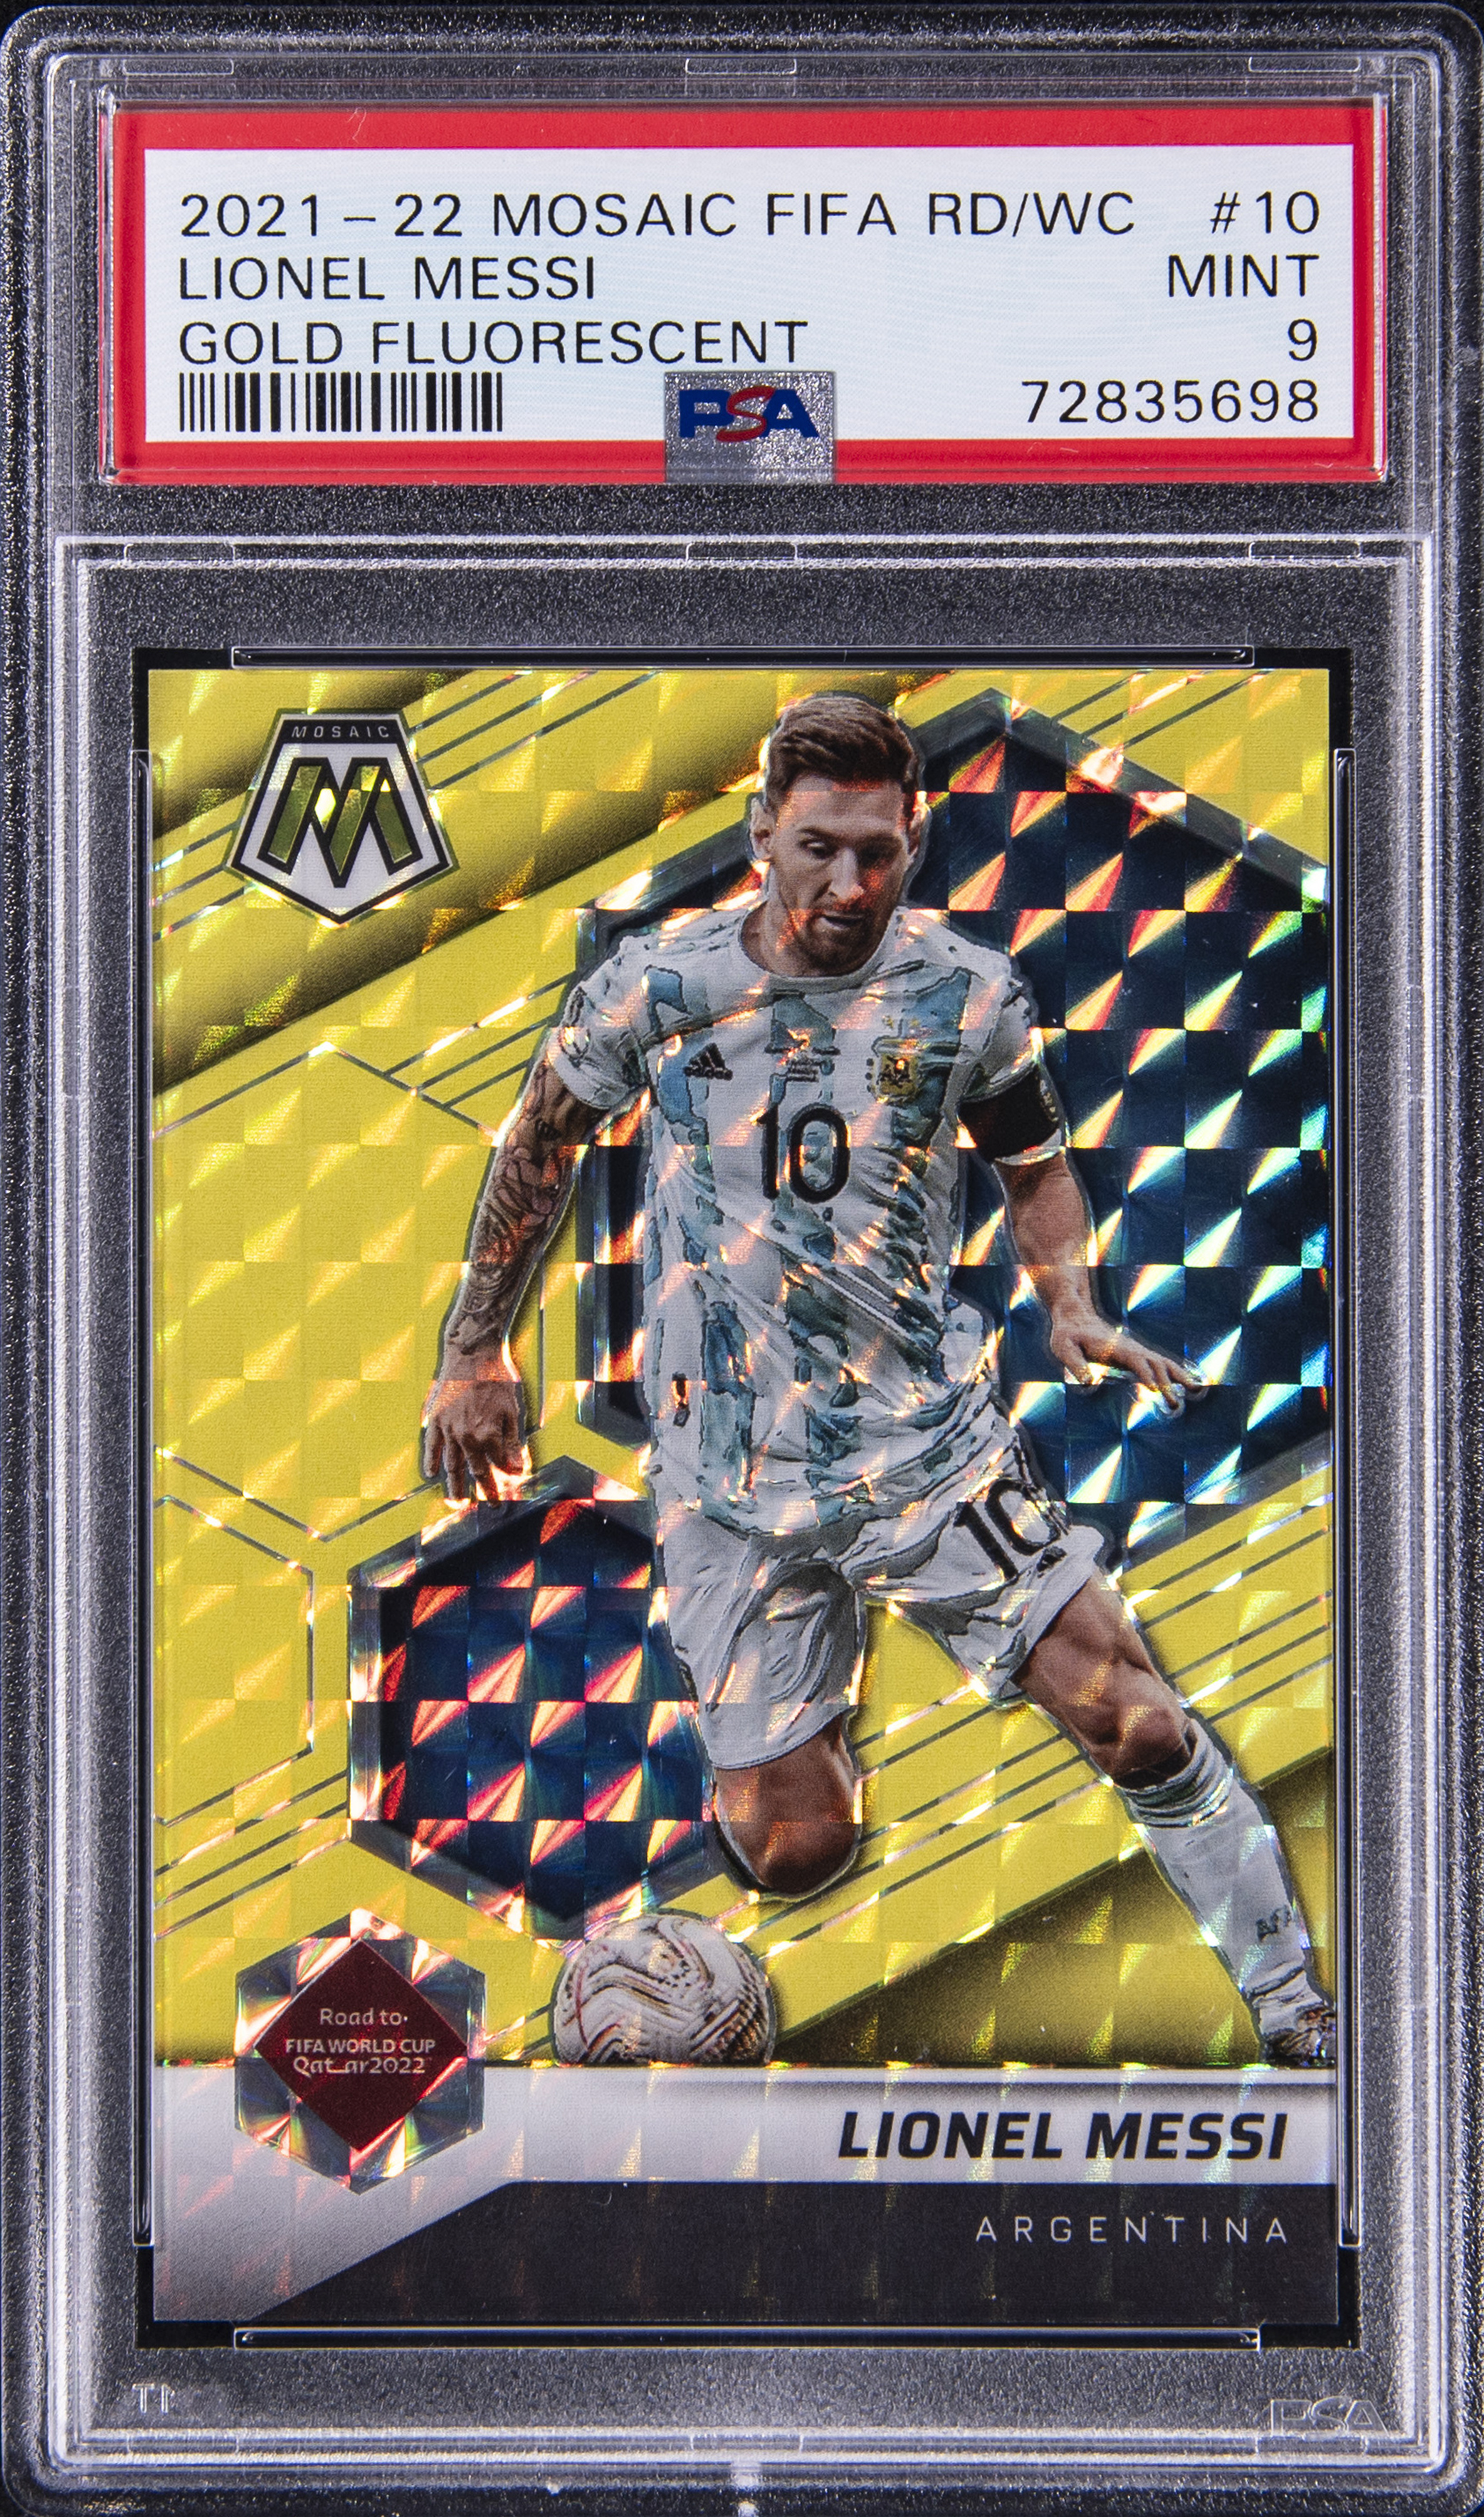 2021-22 Panini Mosaic FIFA Road To World Cup Gold Fluorescent #10 Lionel Messi (#07/10) - PSA MINT 9